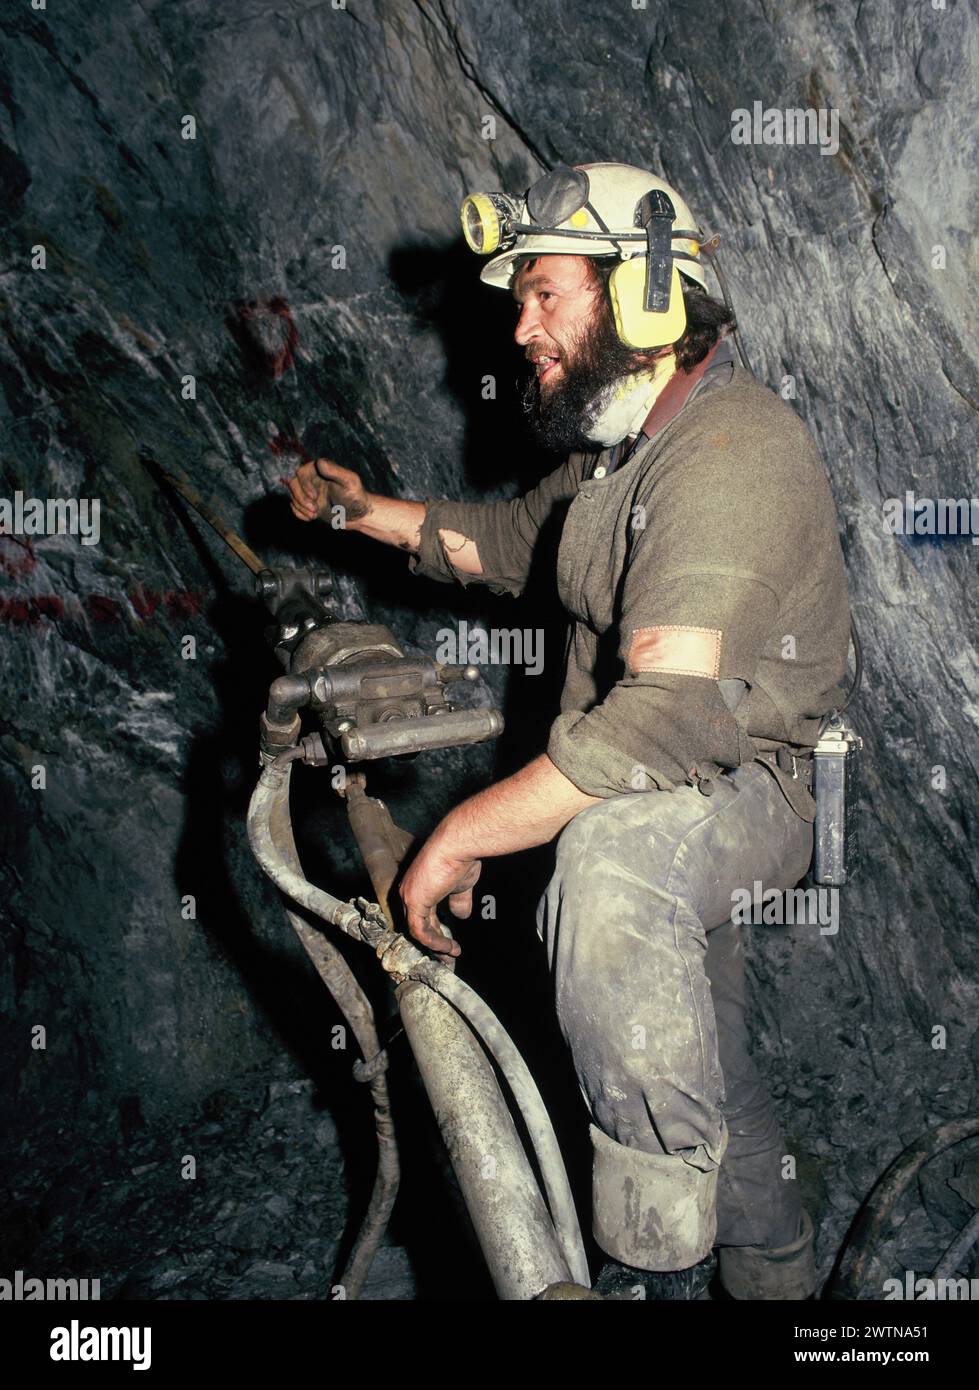 Australia. Industry. Coal mining. Man drilling for core samples. Stock Photo